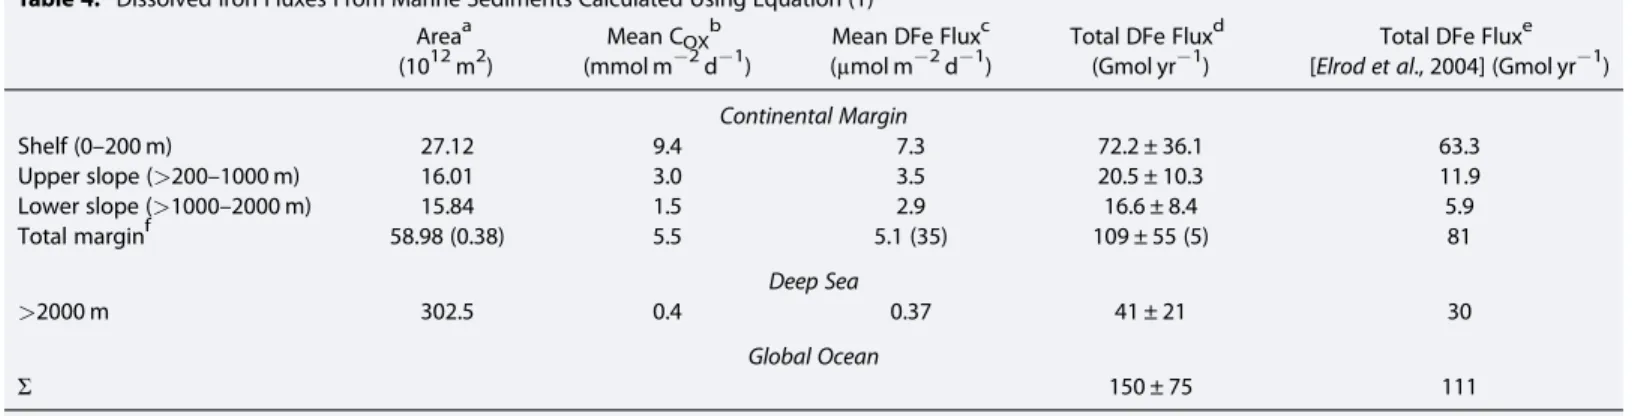 Table 4. Dissolved Iron Fluxes From Marine Sediments Calculated Using Equation (1) Area a